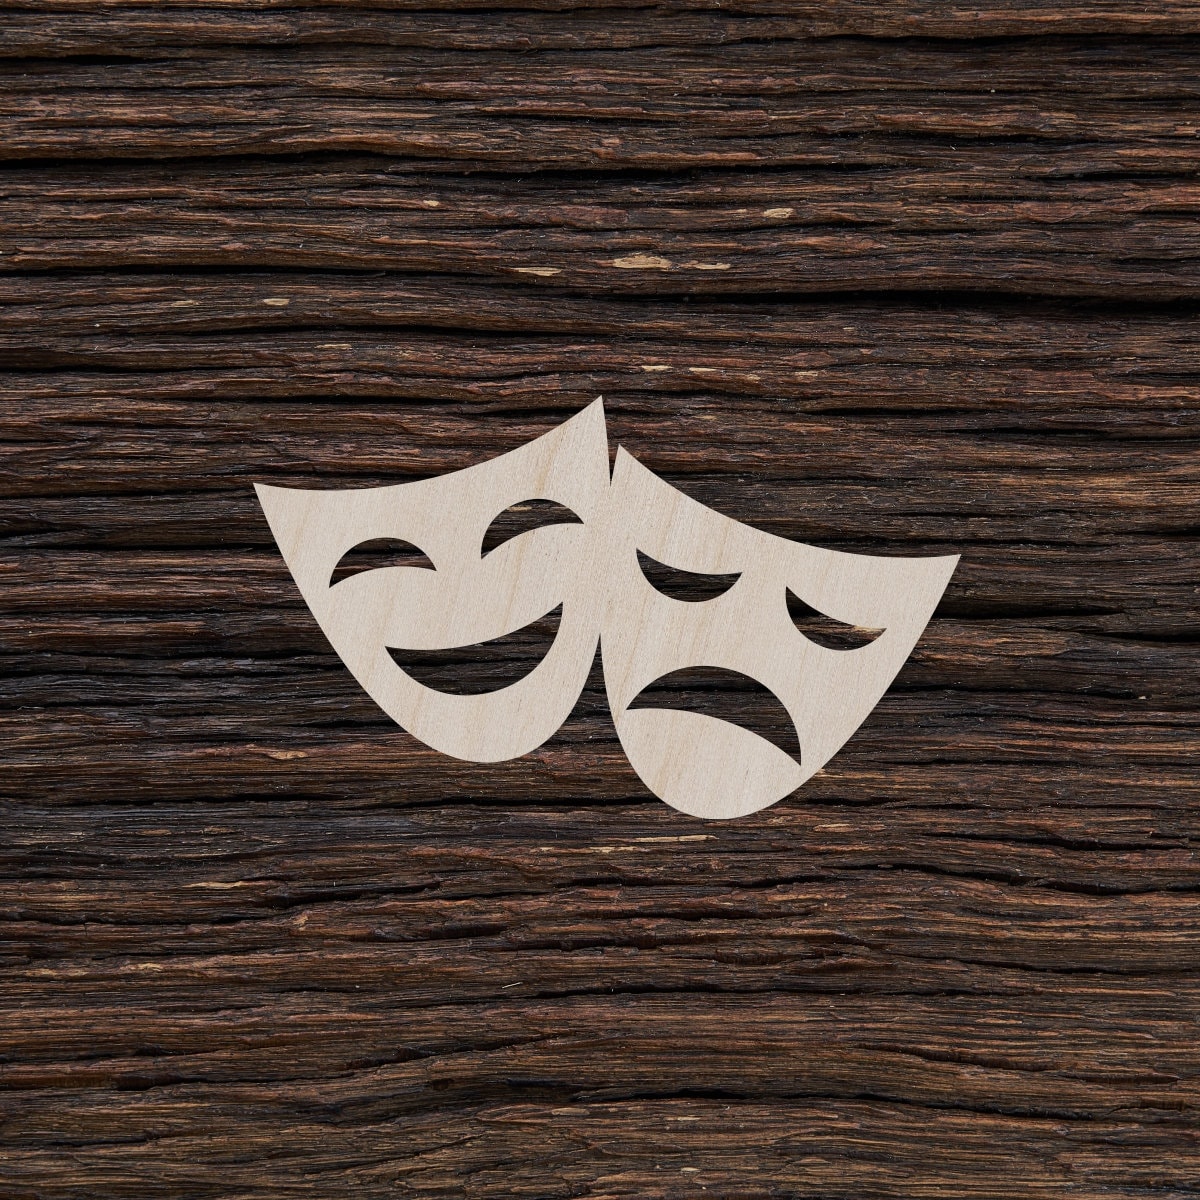 DRAMA Masks Make Your Own Pair of Comedy and Tragedy Paper Masks